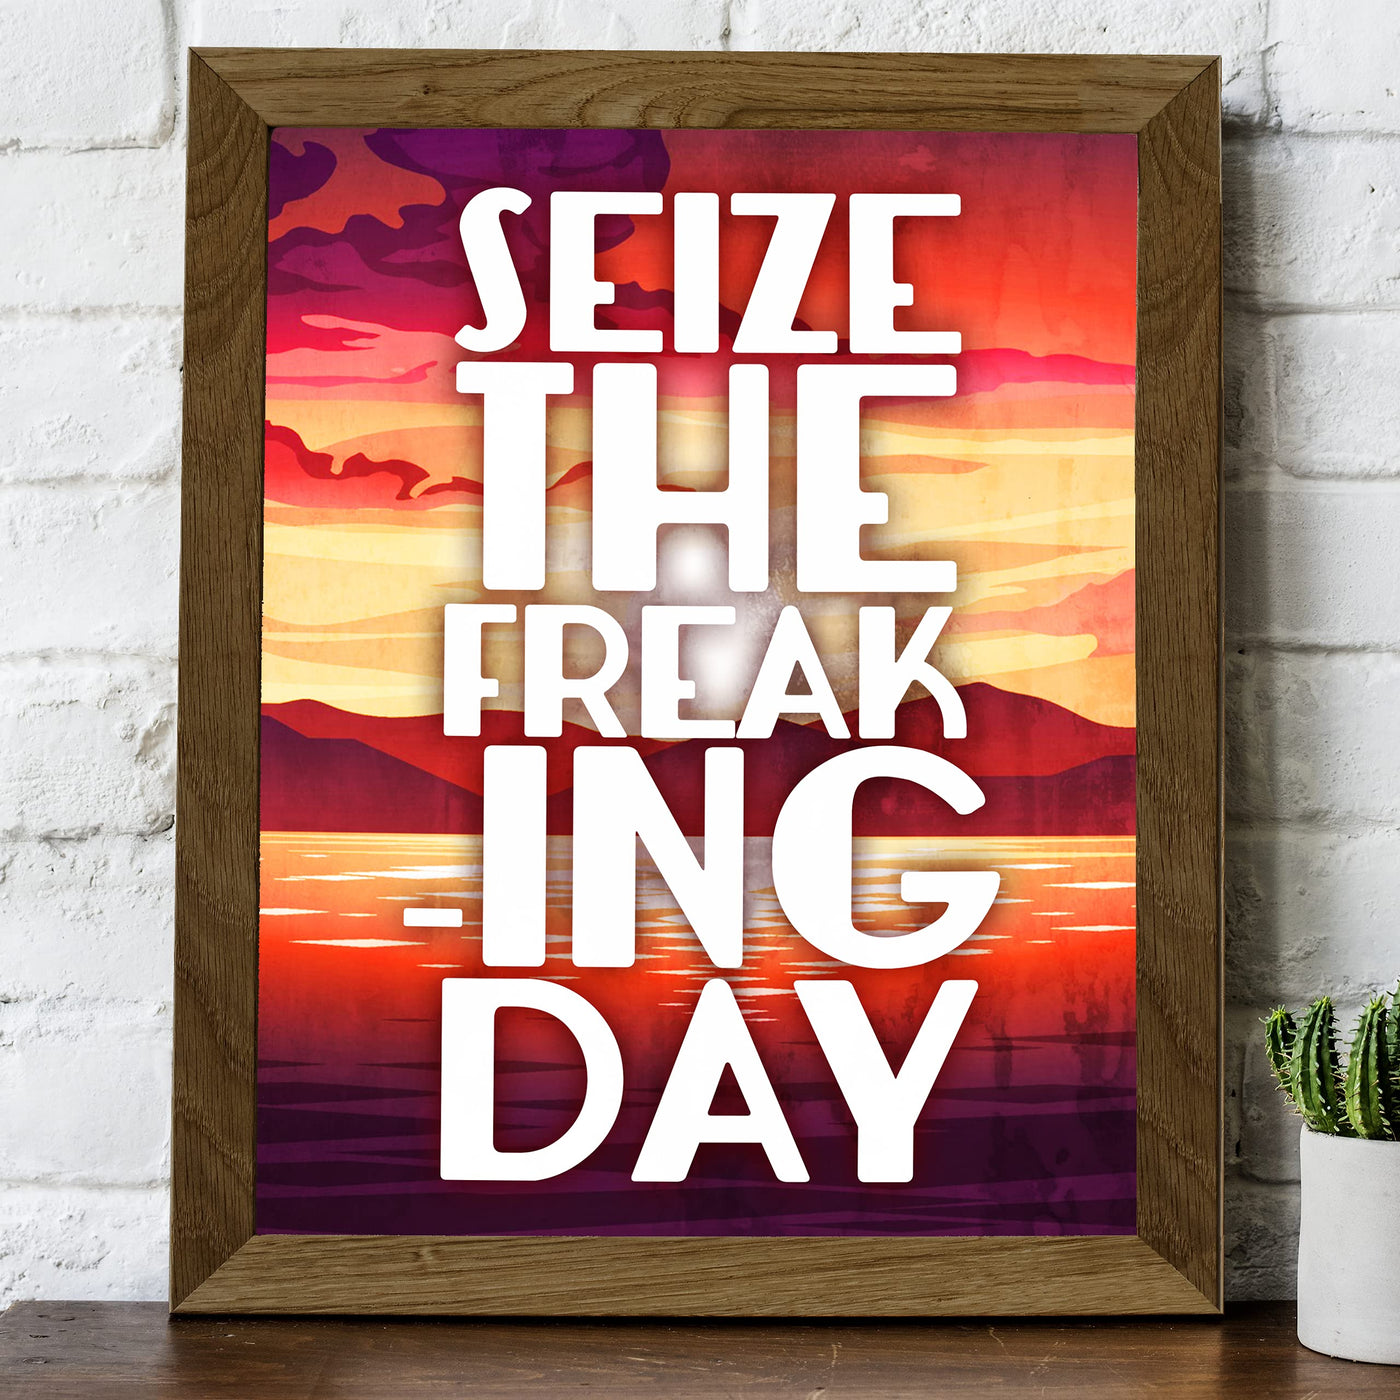 Seize the Freaking Day Funny Motivational Wall Art Sign -8 x 10" Humorous Sunset Print-Ready to Frame. Home-Office-Desk-Bar-Shop-Cave Decor. Fun Gift-Sign to Encourage Success. Carpe Diem!